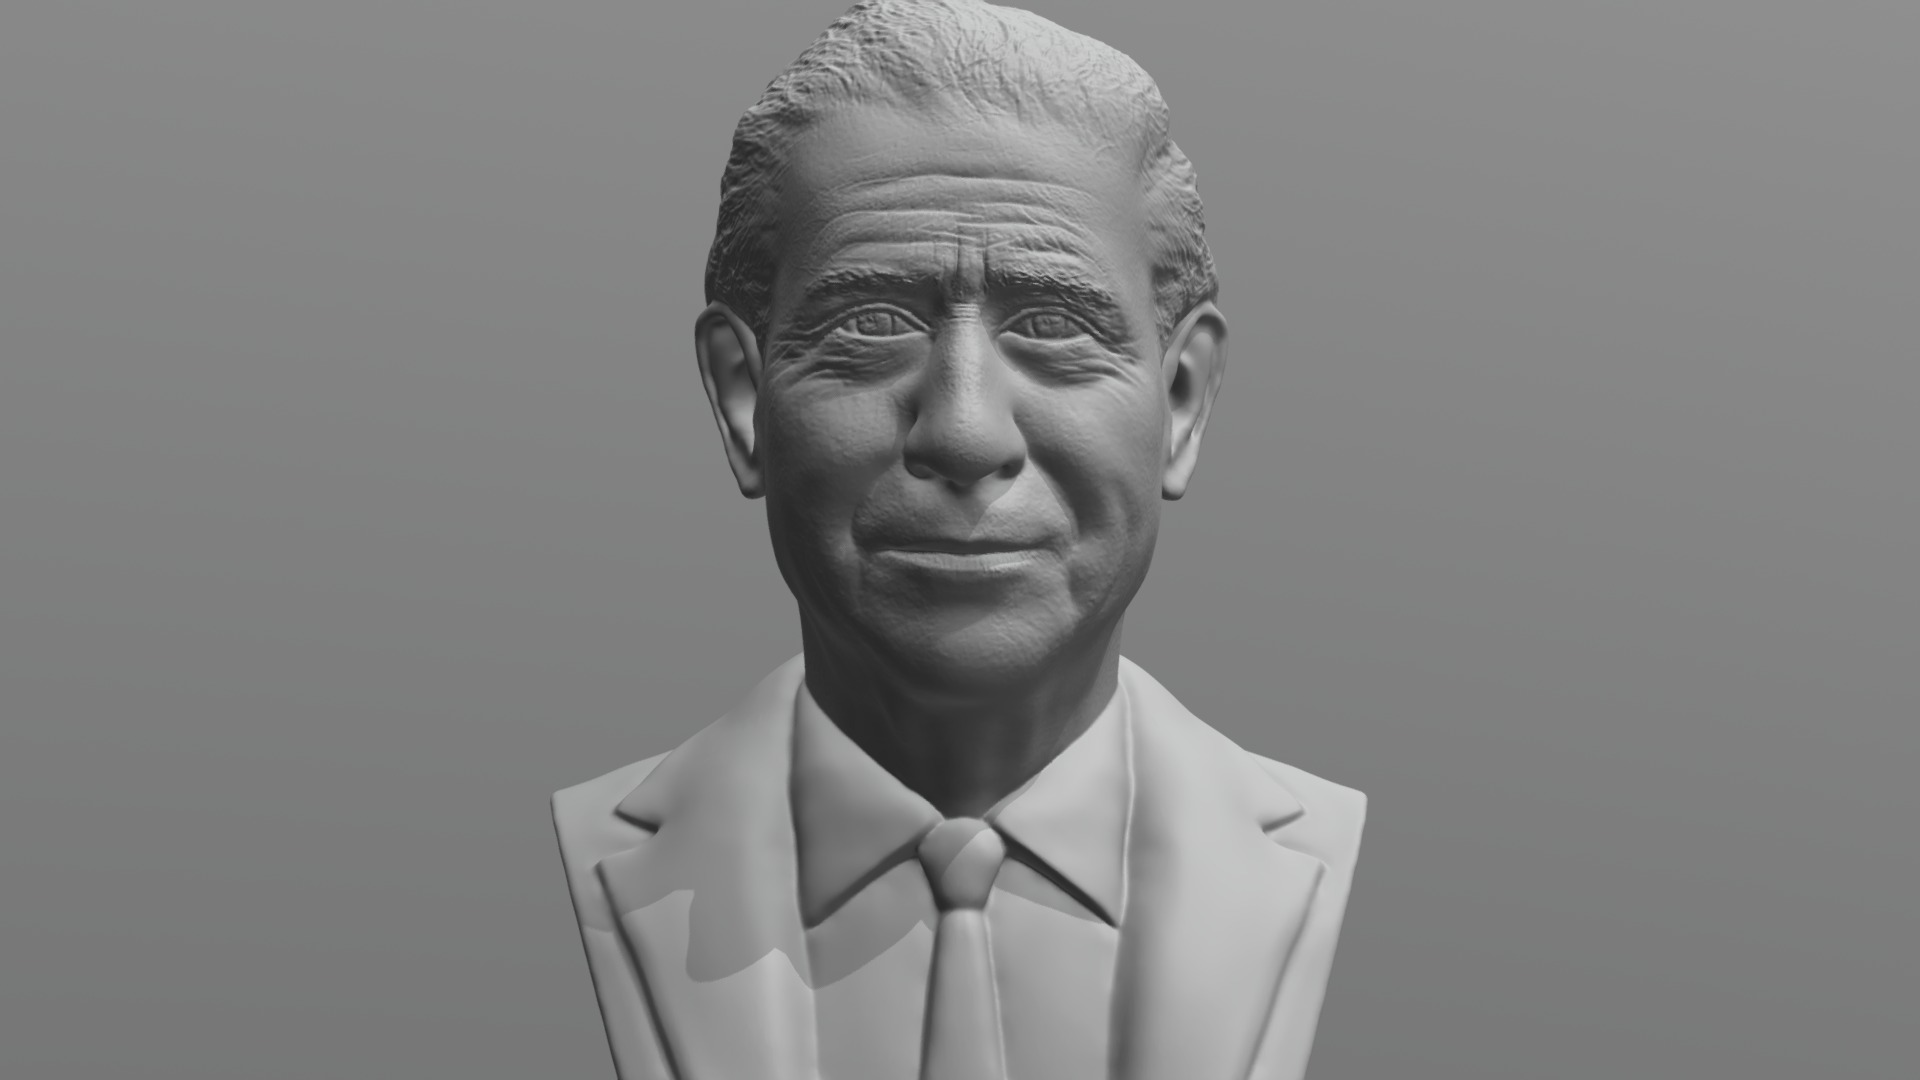 3D model Prince Charles bust for 3D printing - This is a 3D model of the Prince Charles bust for 3D printing. The 3D model is about a man in a suit.